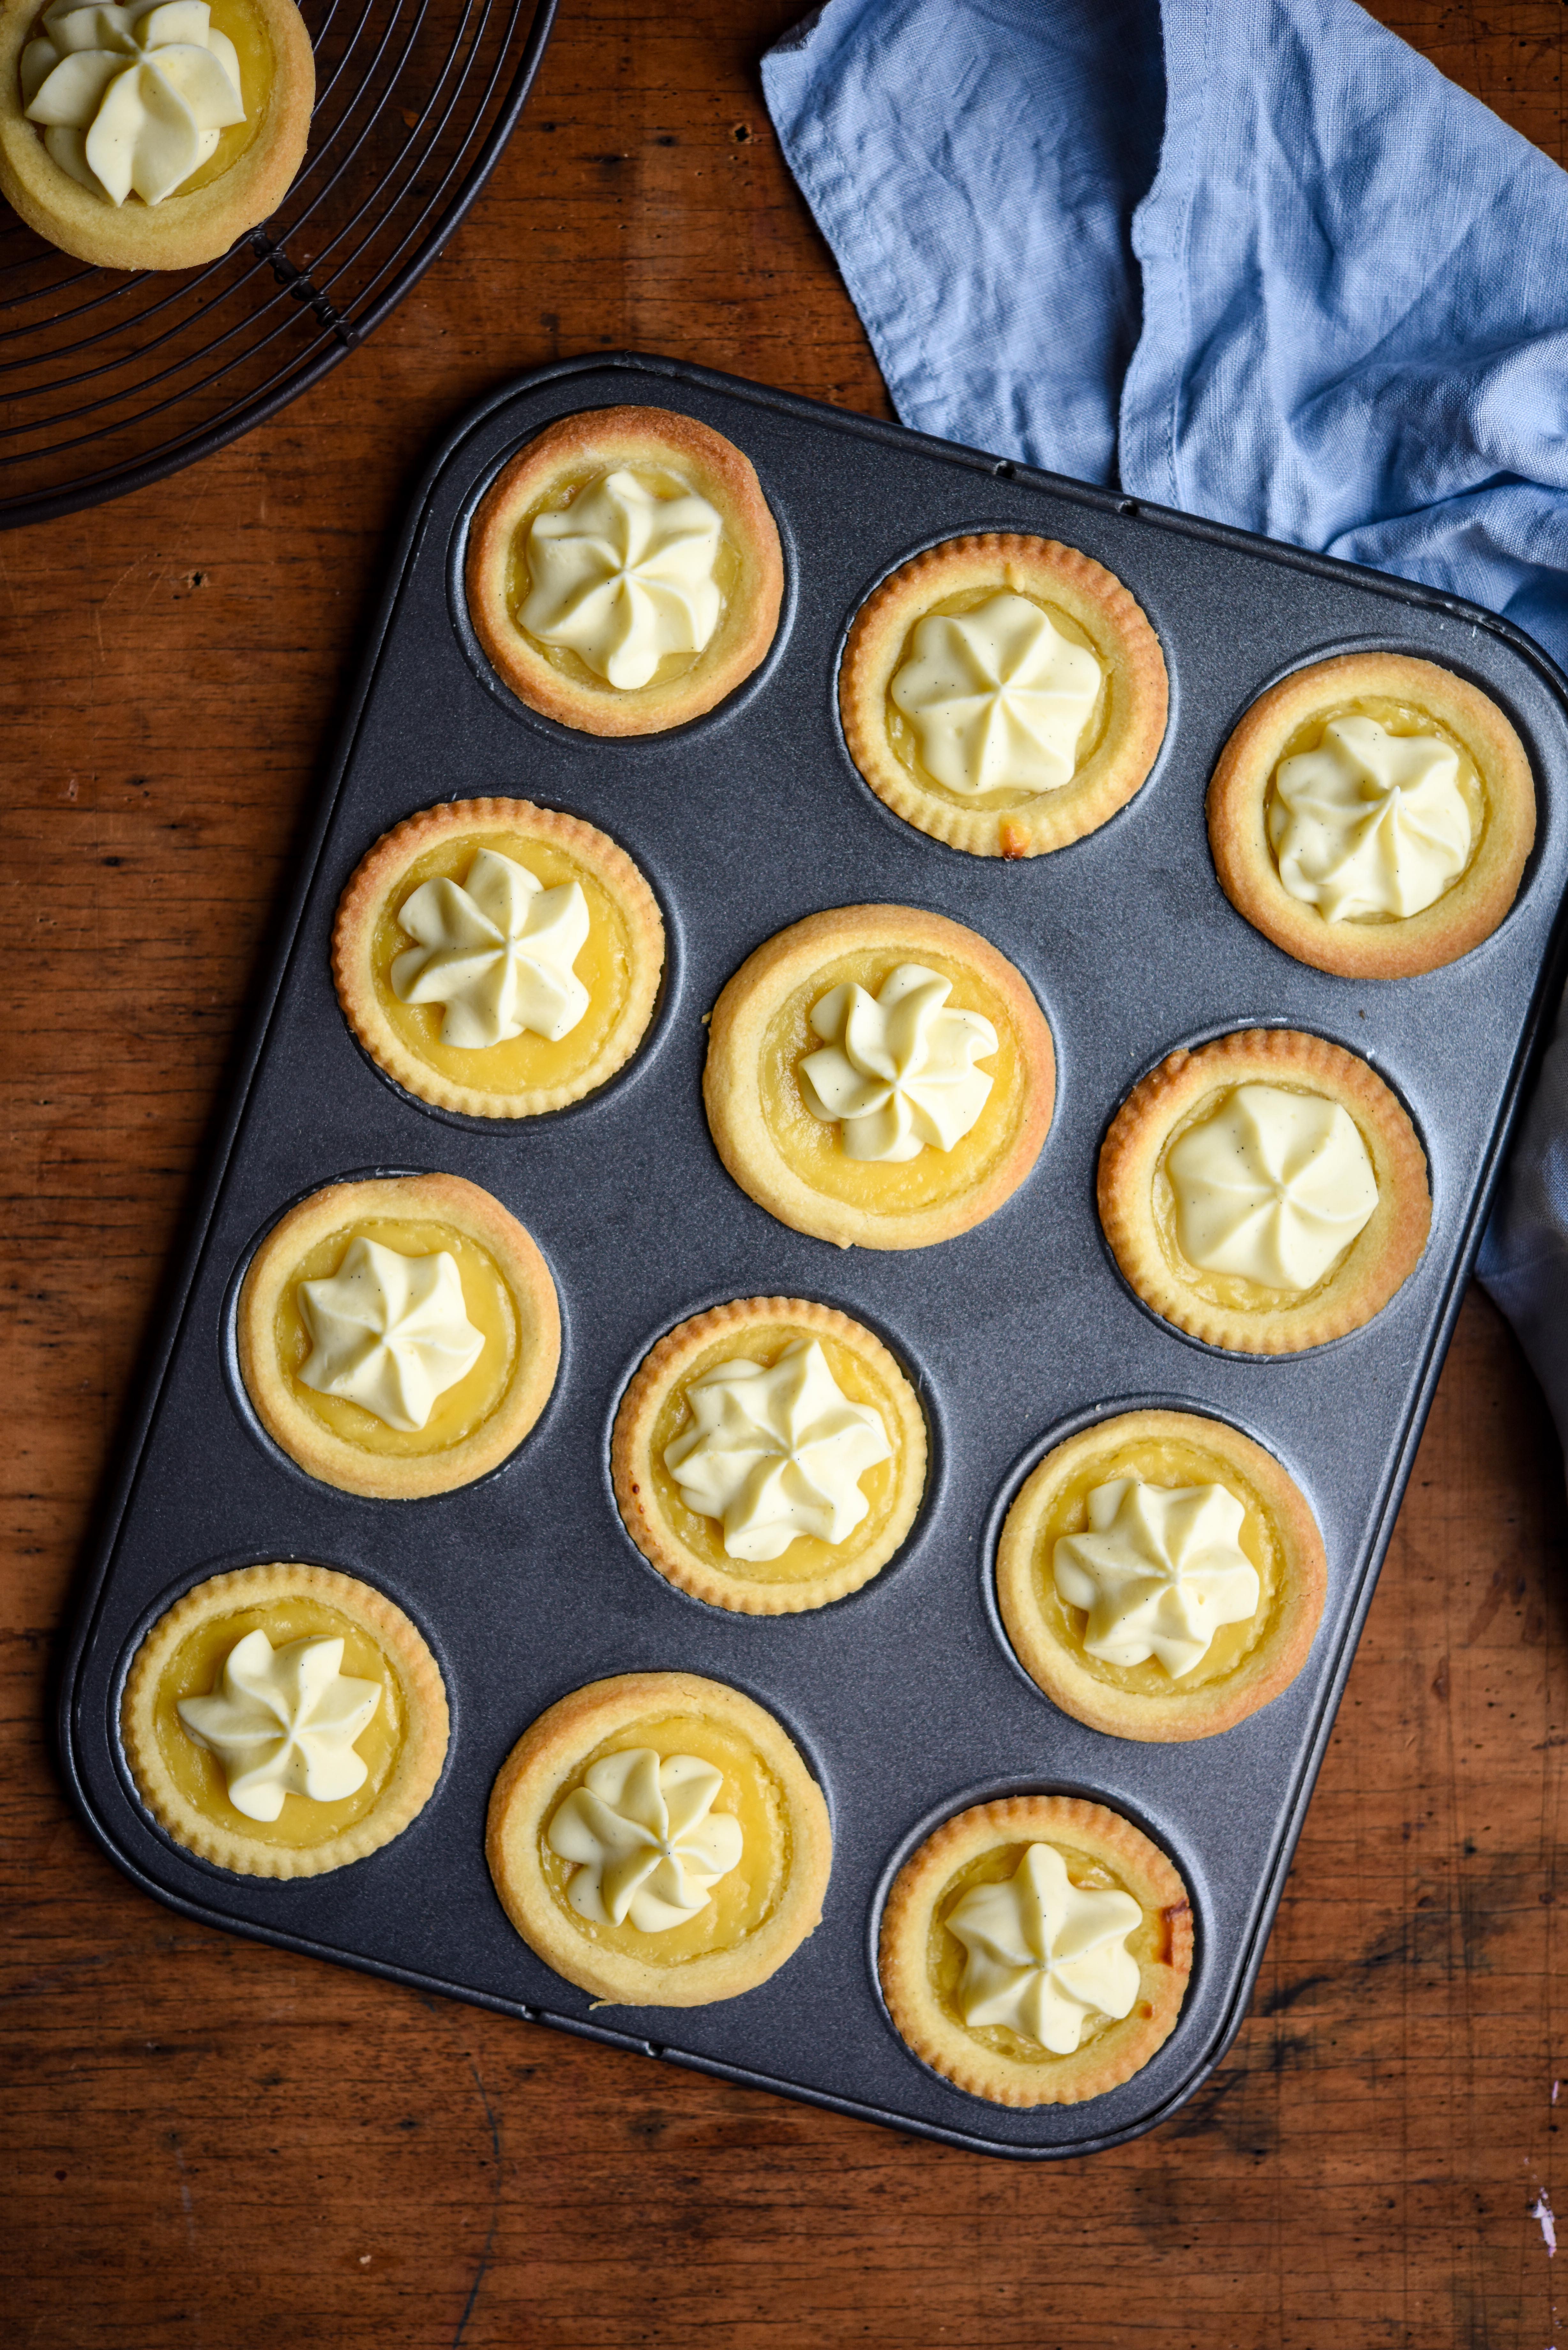 Lemon Curd Tarts with Whipped White Chocolate Ganache | Patisserie Makes Perfect